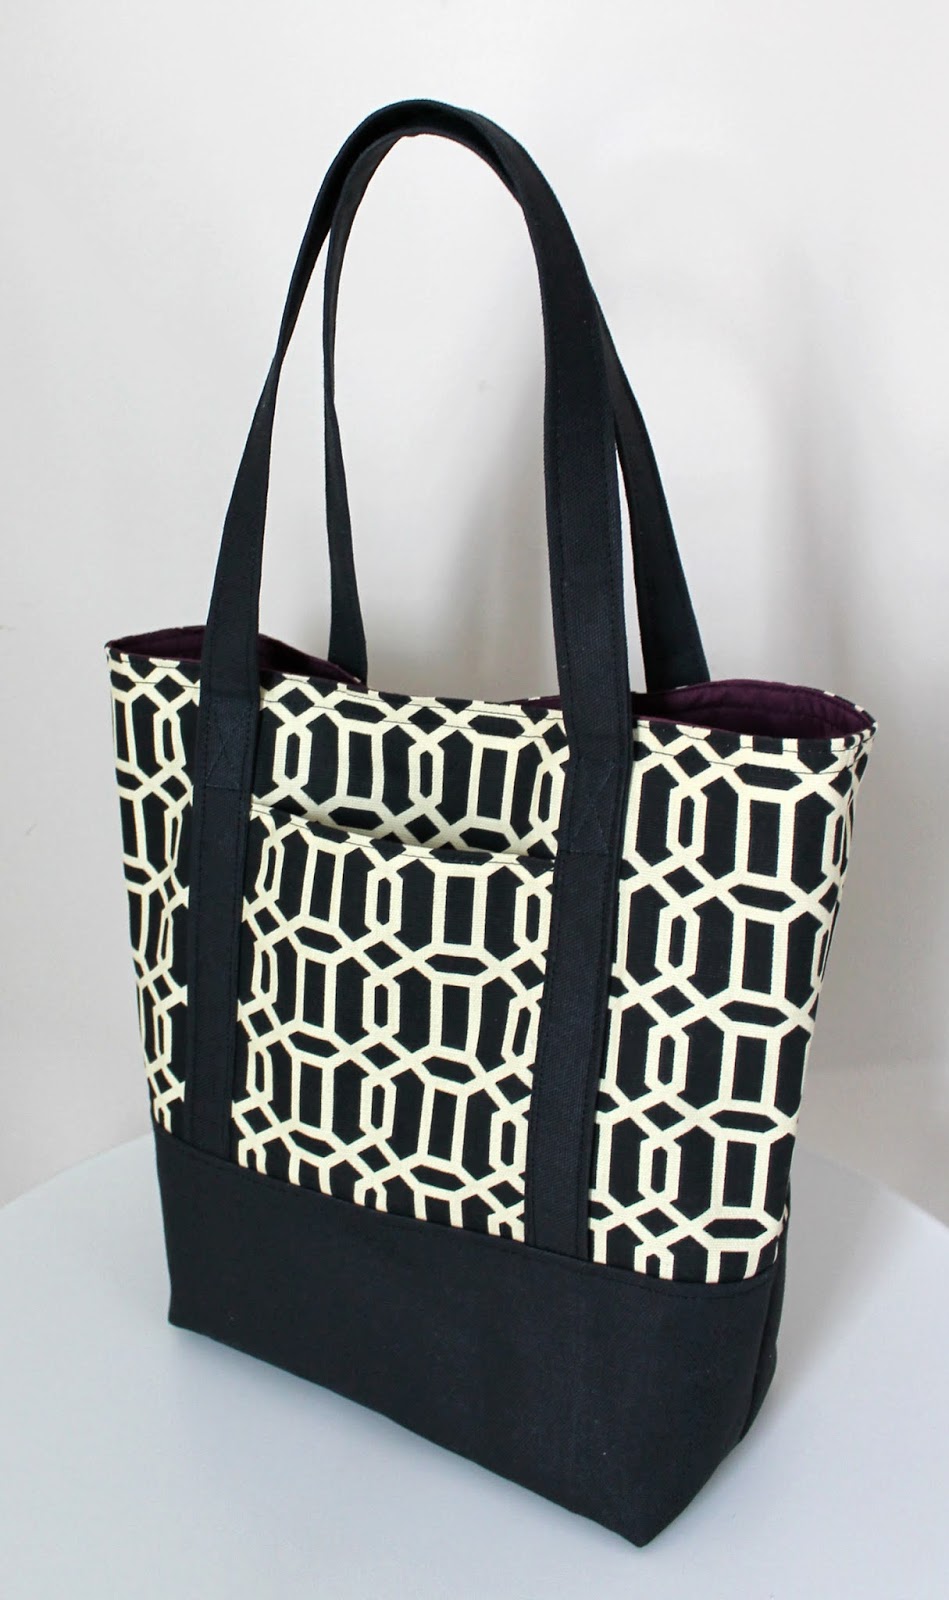 10 Tote Bags to Sew for Summer! - Simple Simon and Company